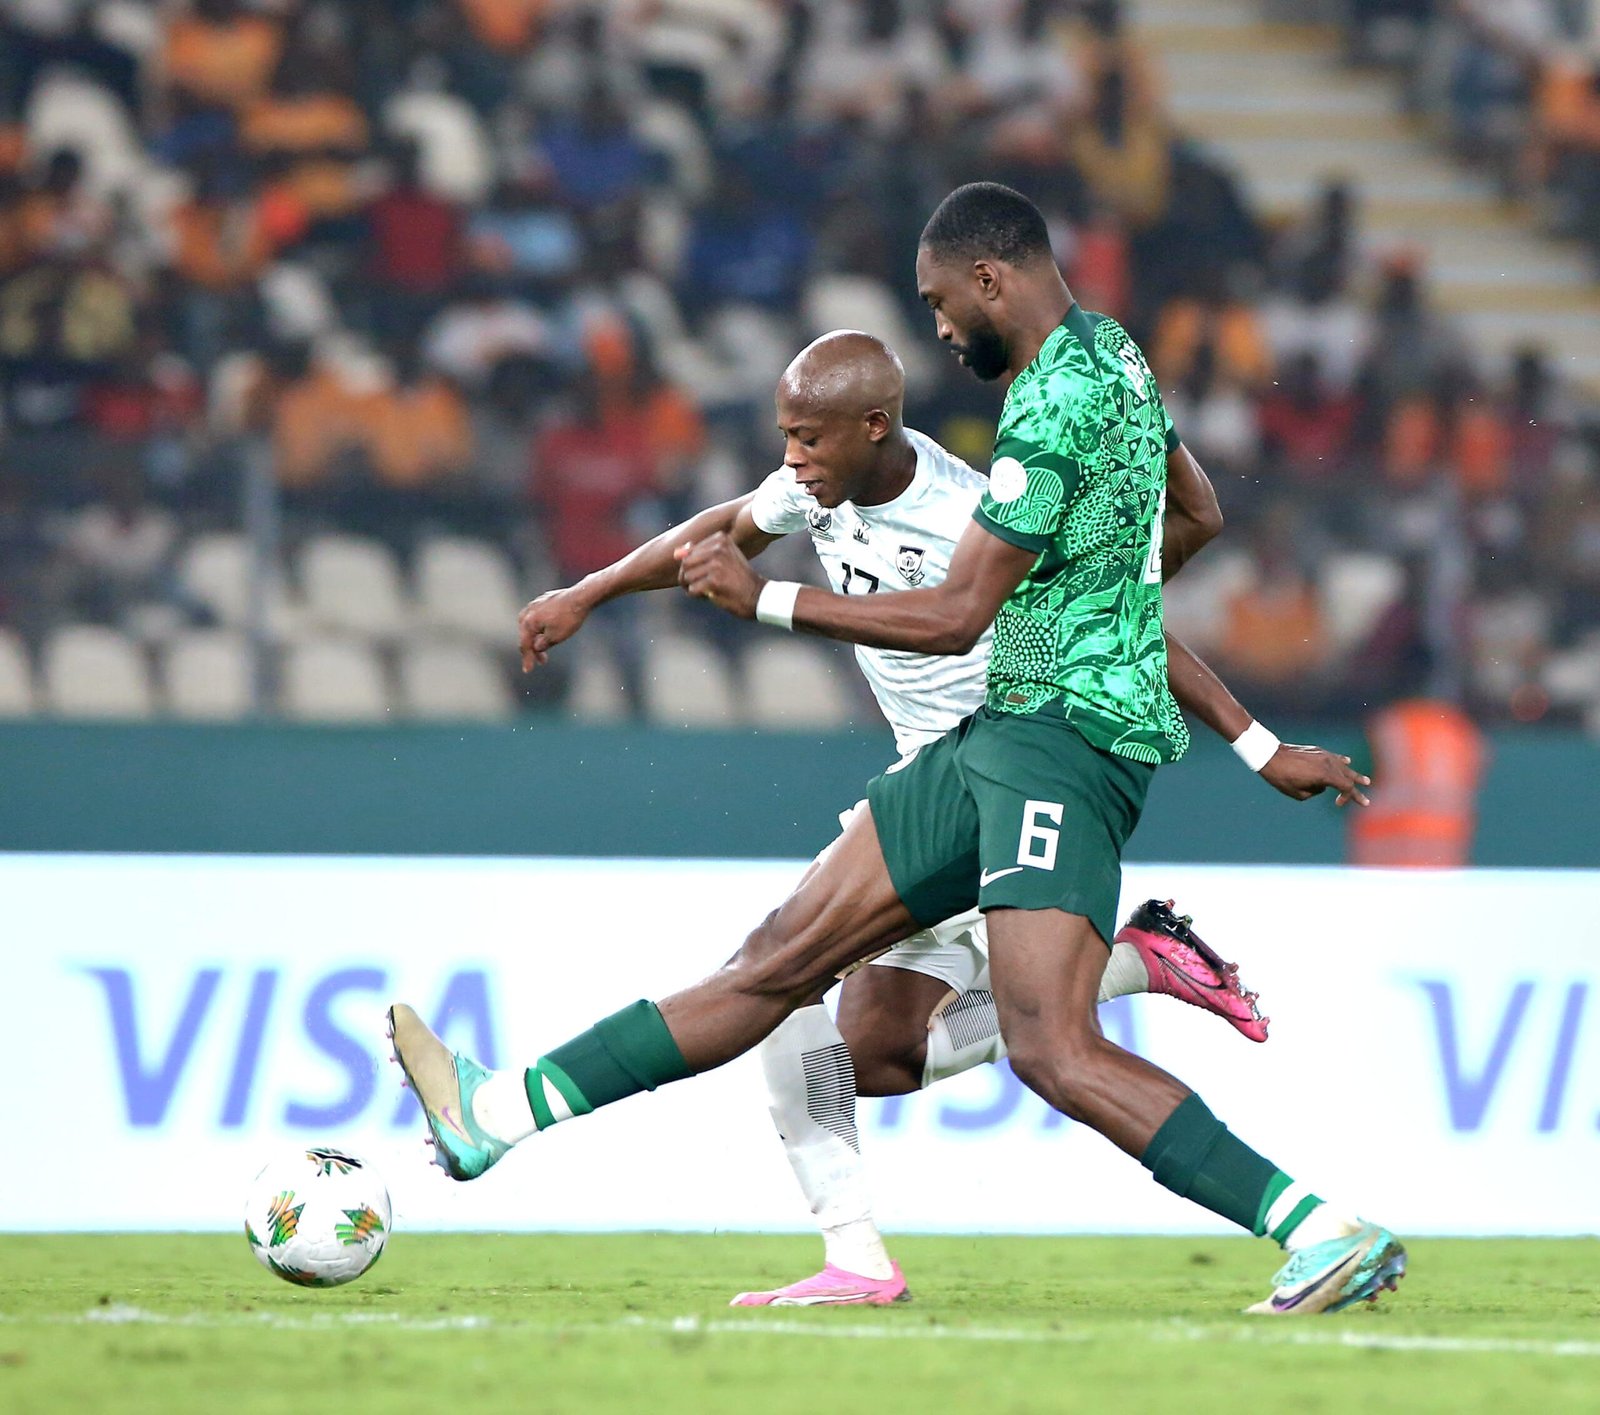 AFCON 2023: Nigeria beat South Africa 4-2 on penalties to reach Cup Final